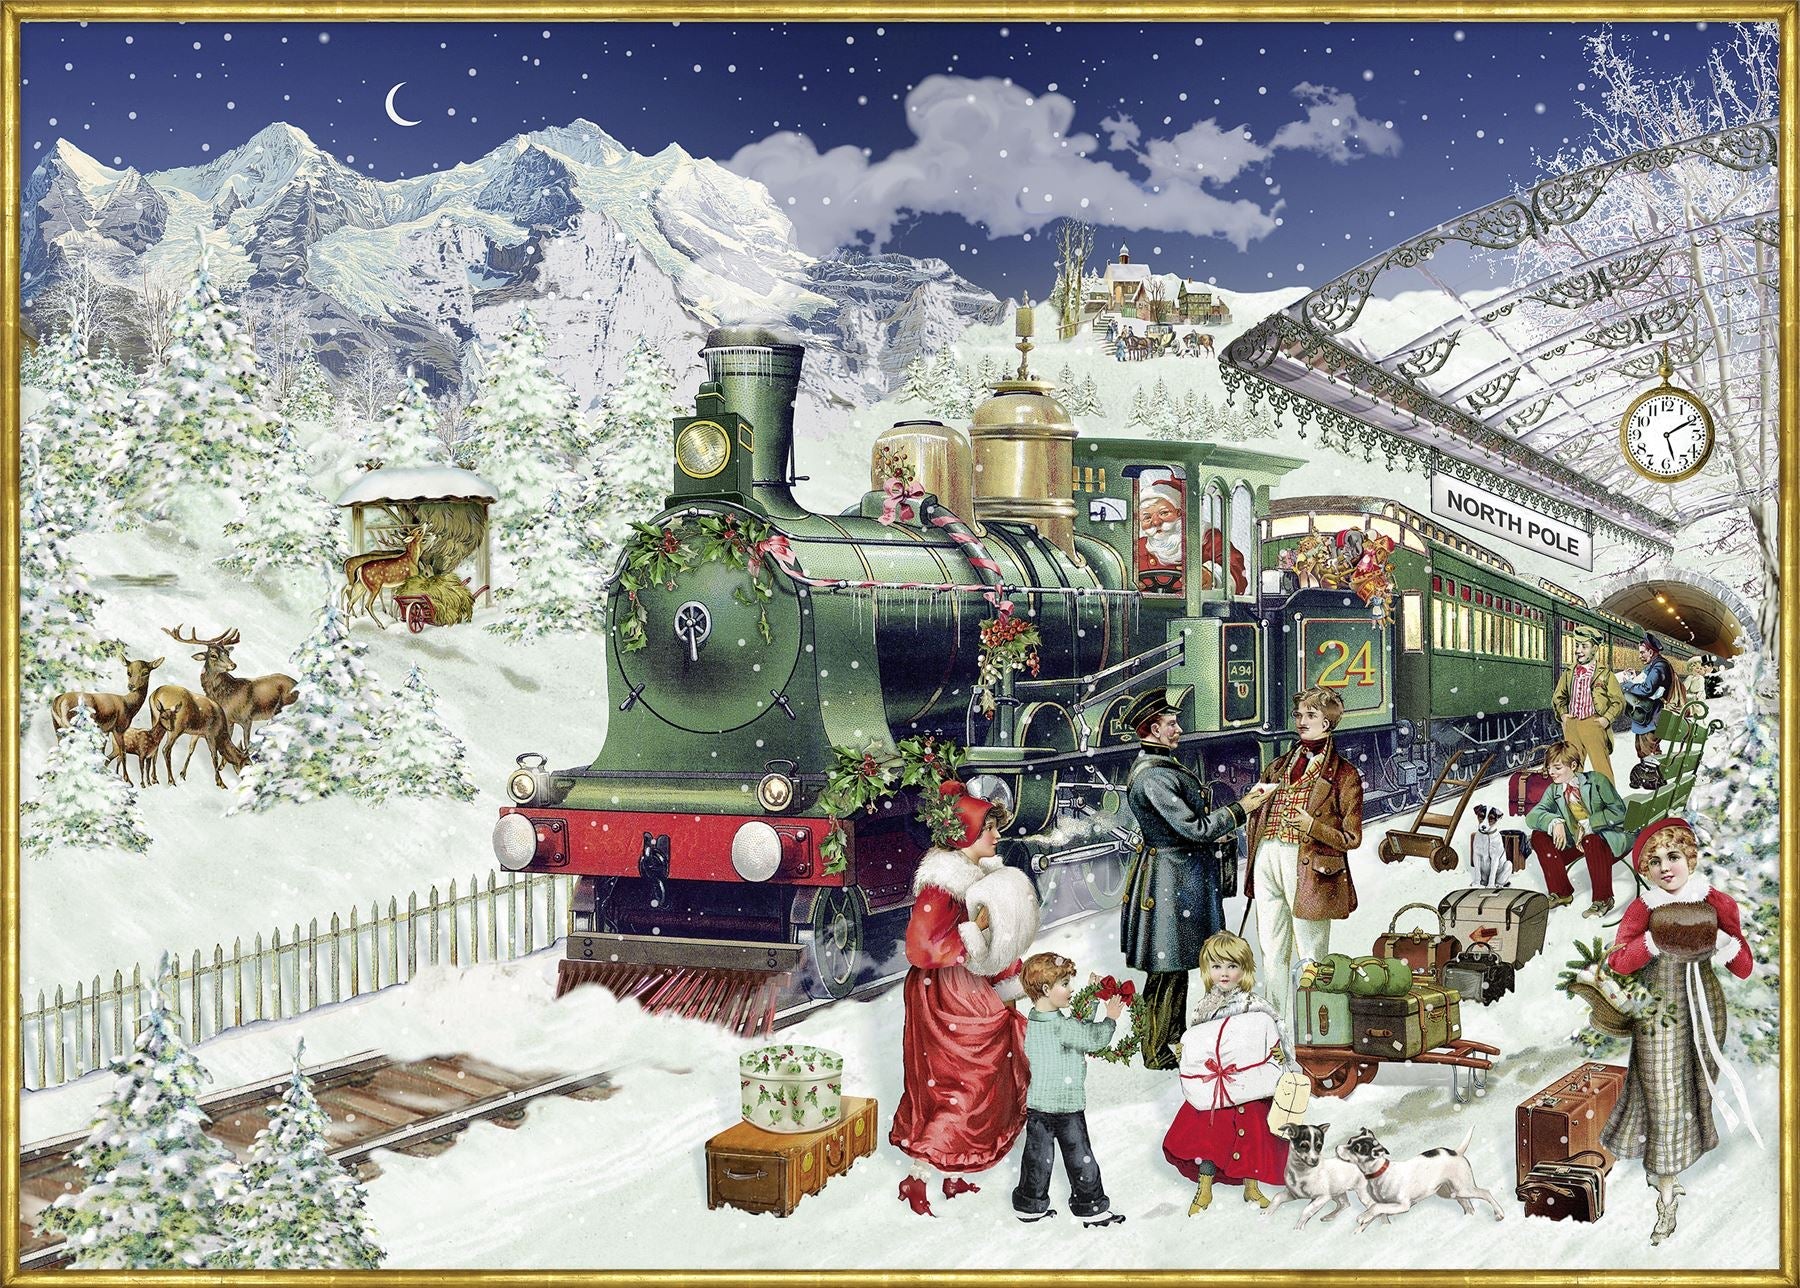 The Christmas Express - Coppenrath 1000 Piece Jigsaw Puzzle